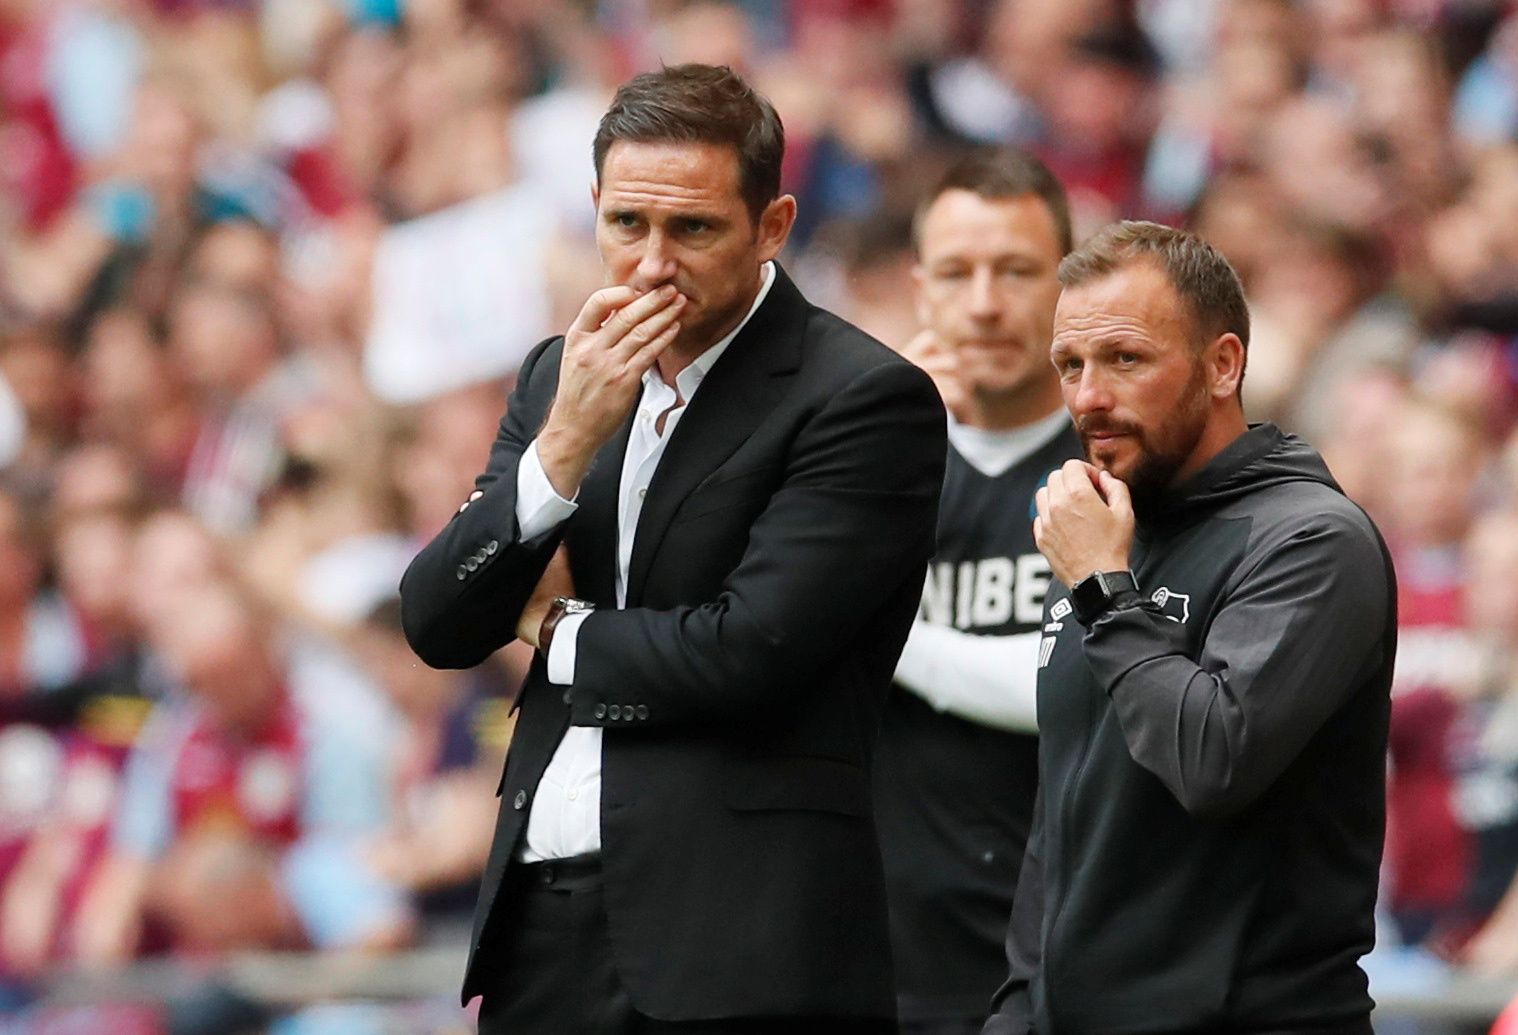 Soccer Football - Championship Playoff Final - Aston Villa v Derby County - Wembley Stadium, London, Britain - May 27, 2019  Derby County manager Frank Lampard talks with assistant manager Jody Morris as Aston Villa assistant manager John Terry looks on  REUTERS/David Klein